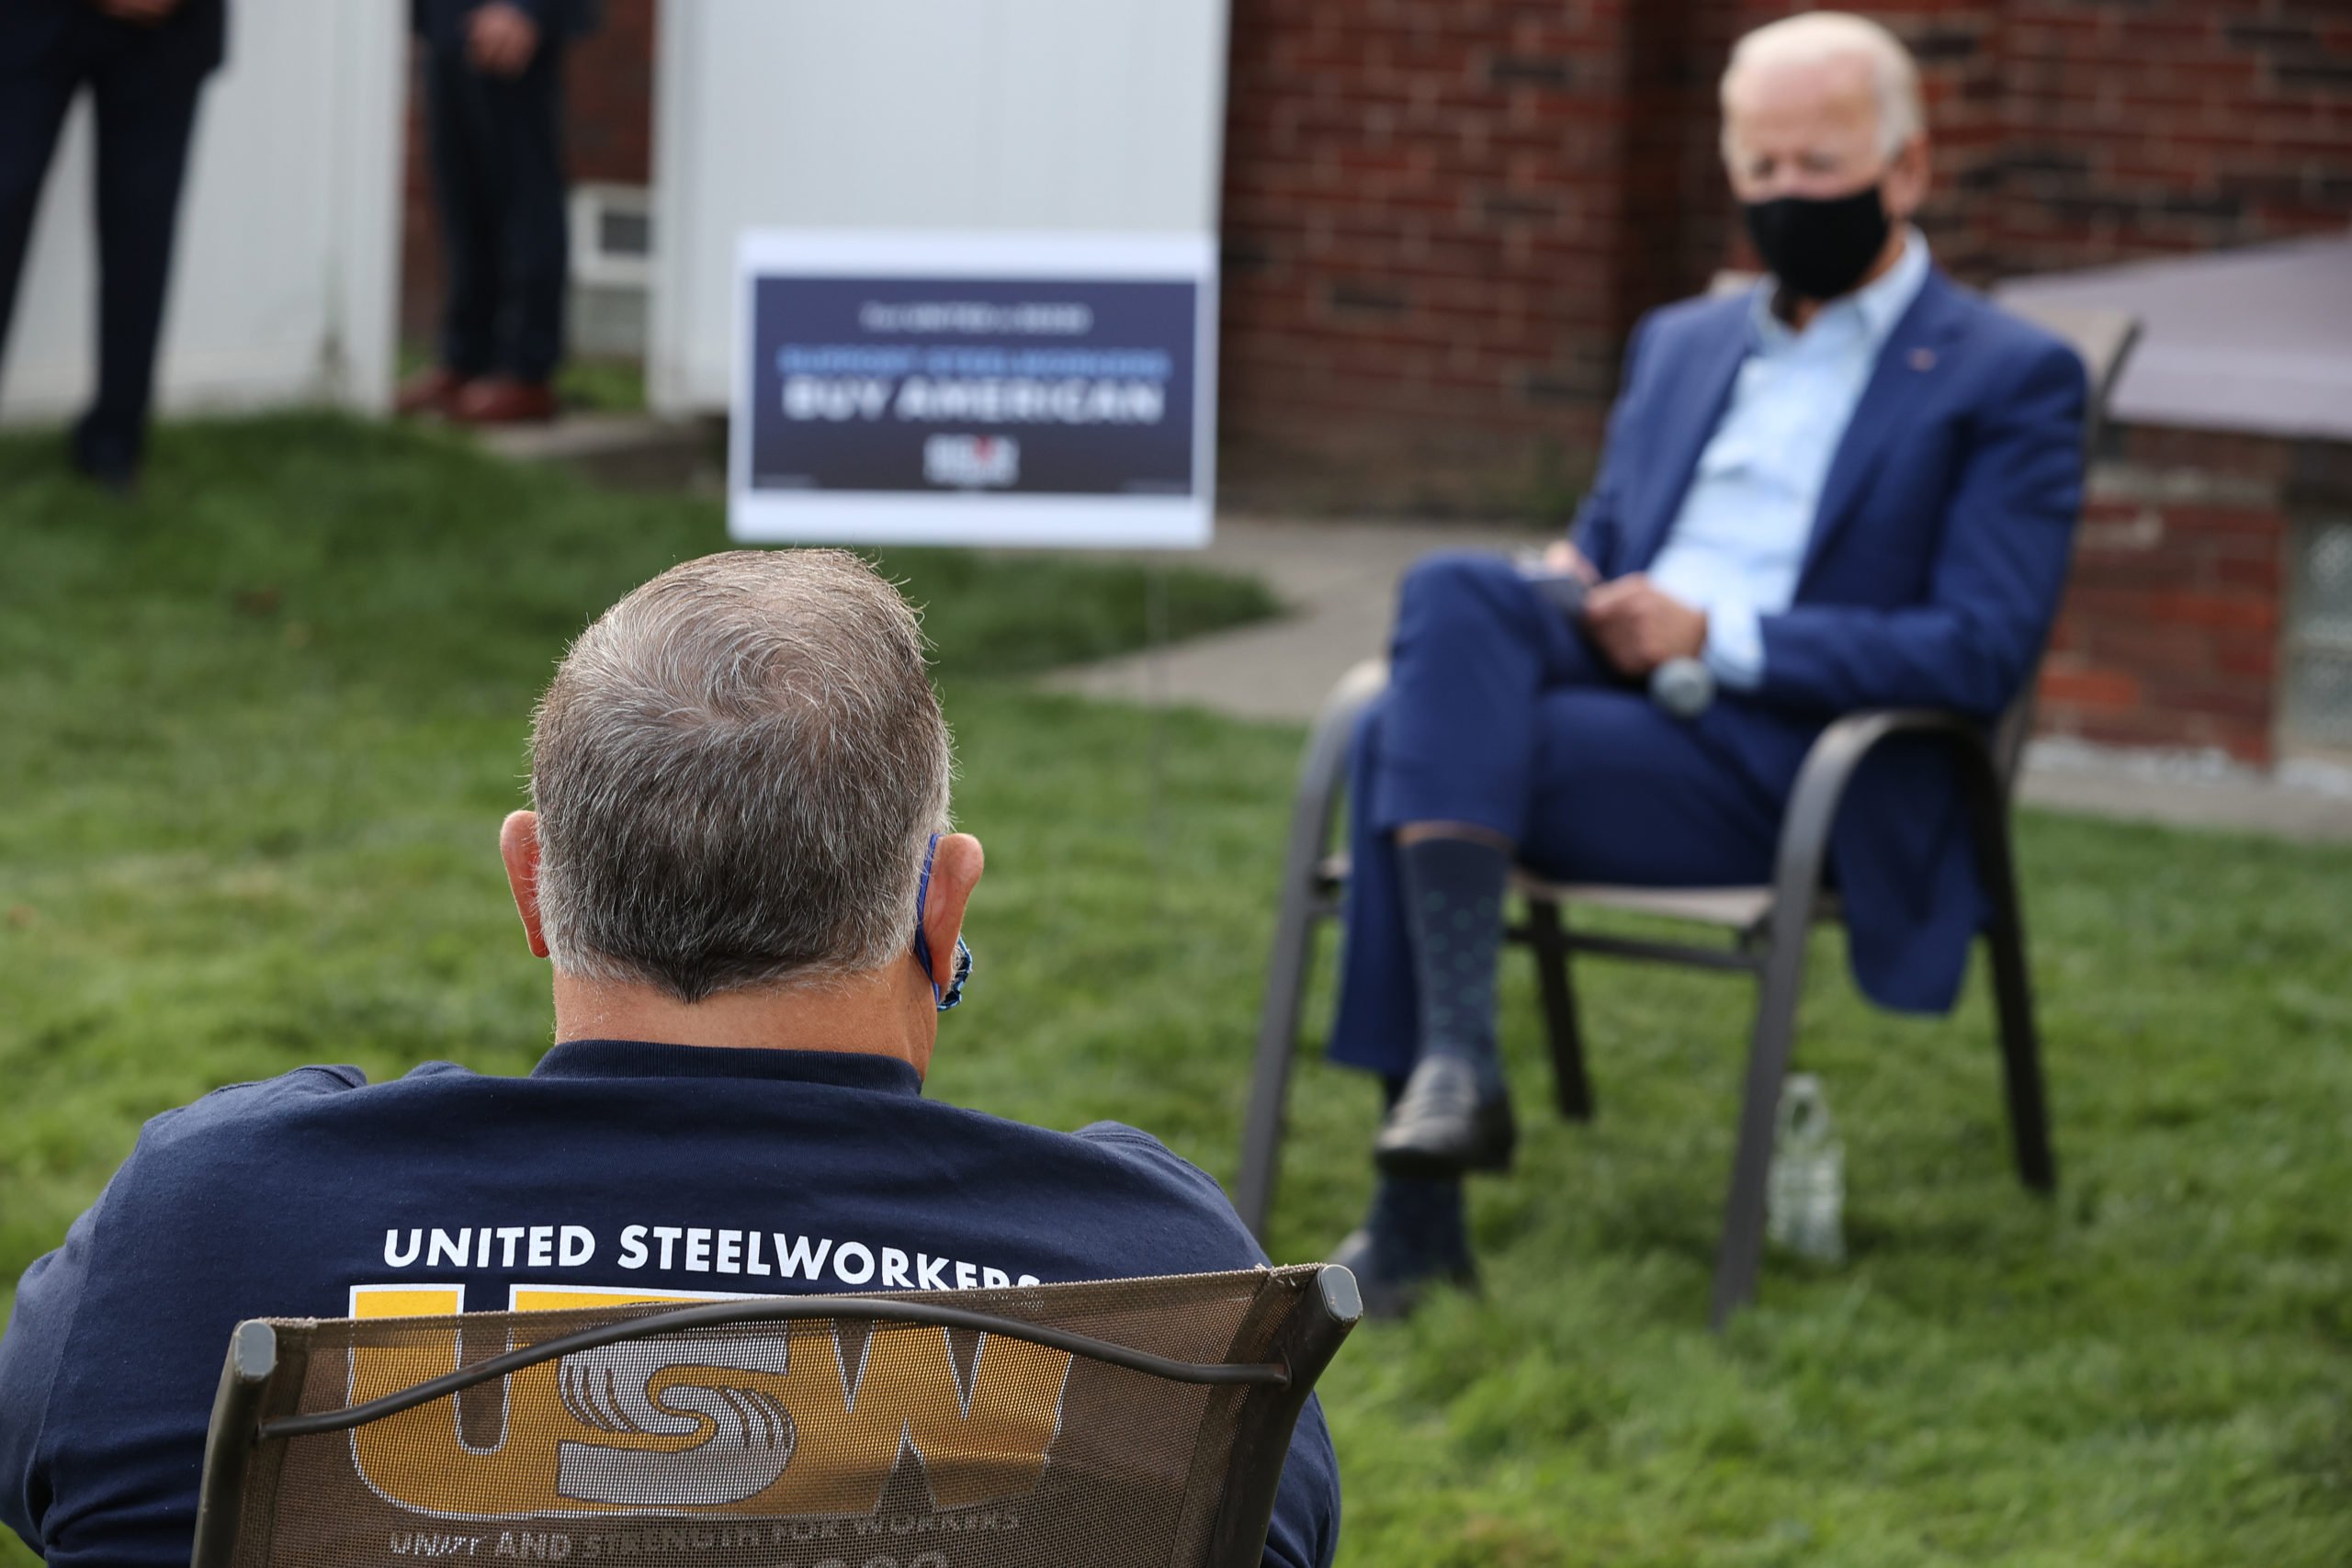 Democratic presidential nominee Joe Biden talks with members of the United Steelworkers union on Sept. 9 in Detroit, Michigan. (Chip Somodevilla/Getty Images)